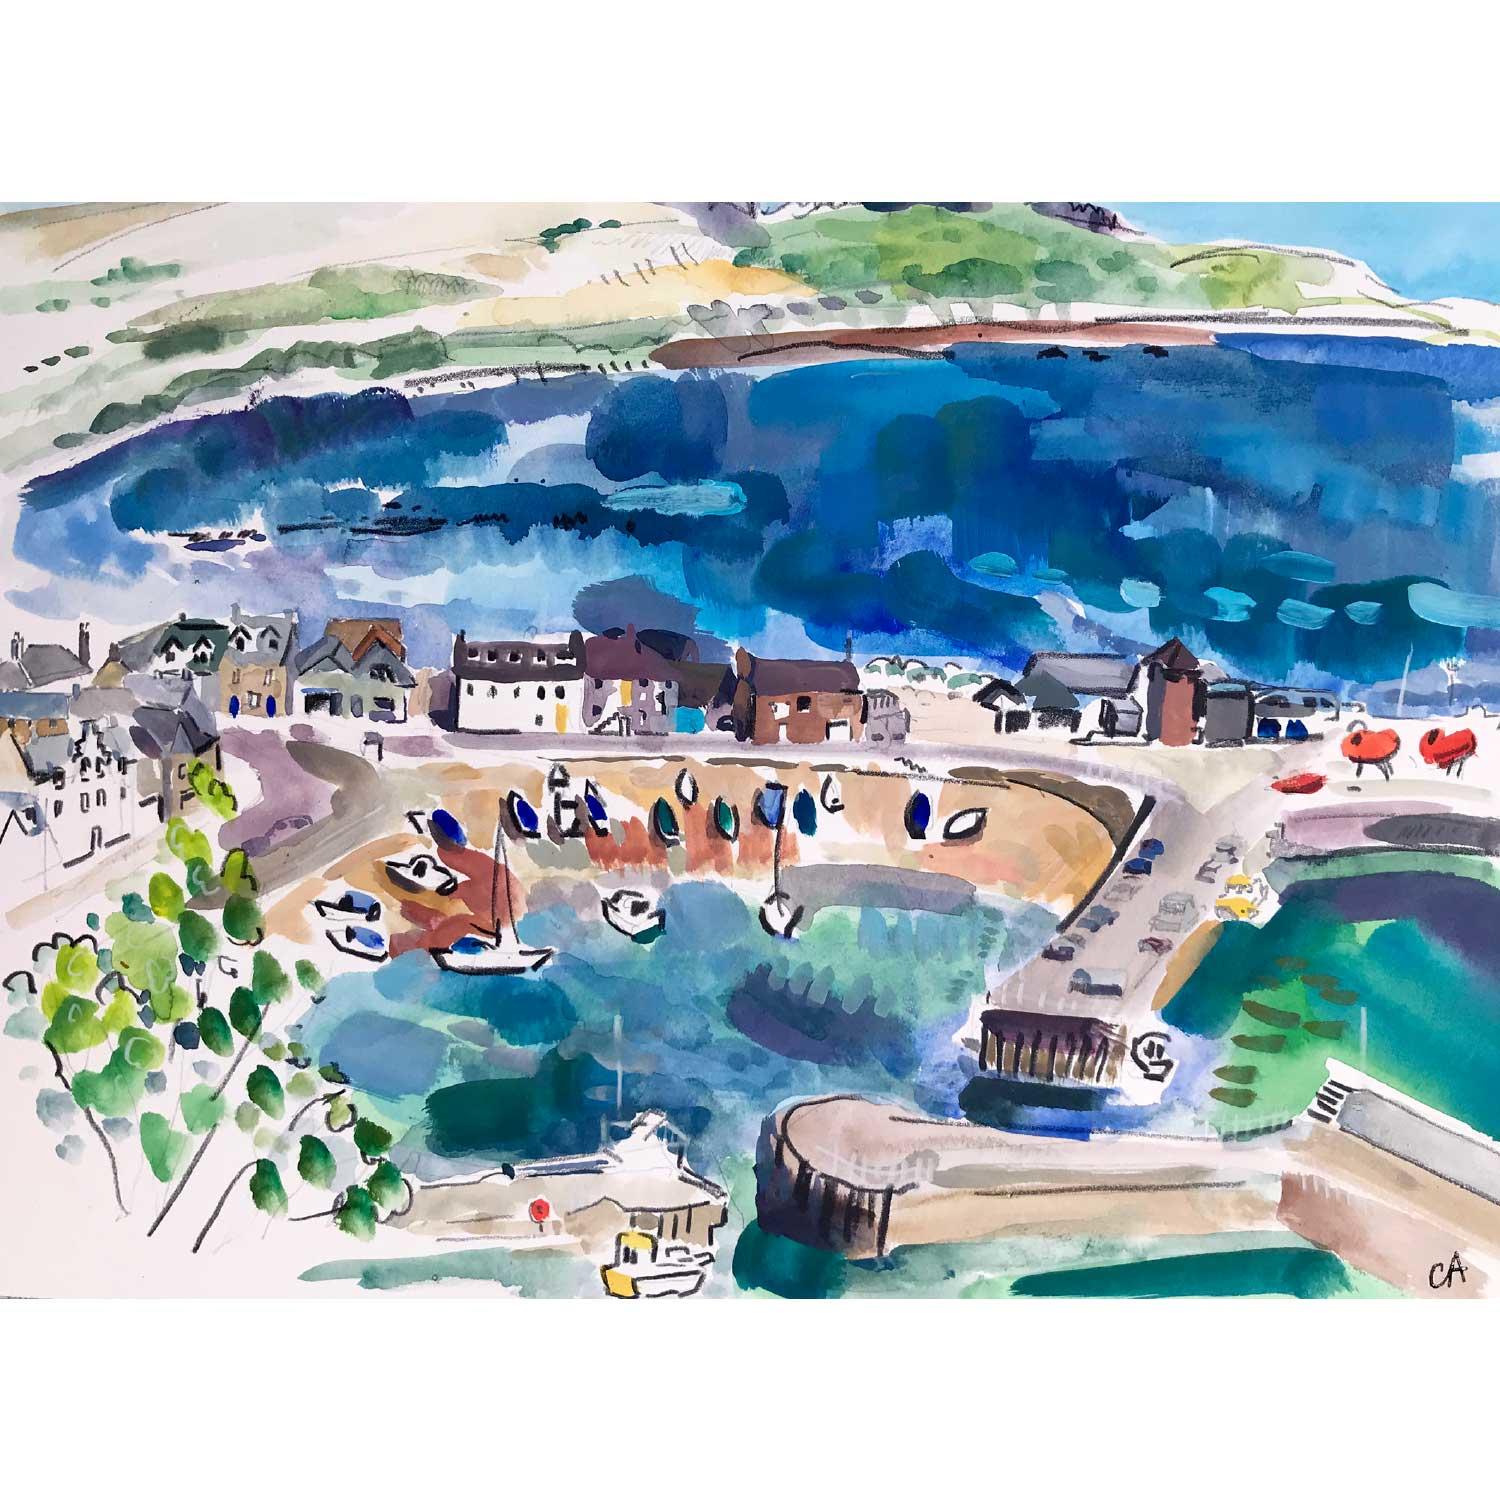 Harbour at Low Tide from Bervie Braes, Stonehaven by Clare Arbuthnott